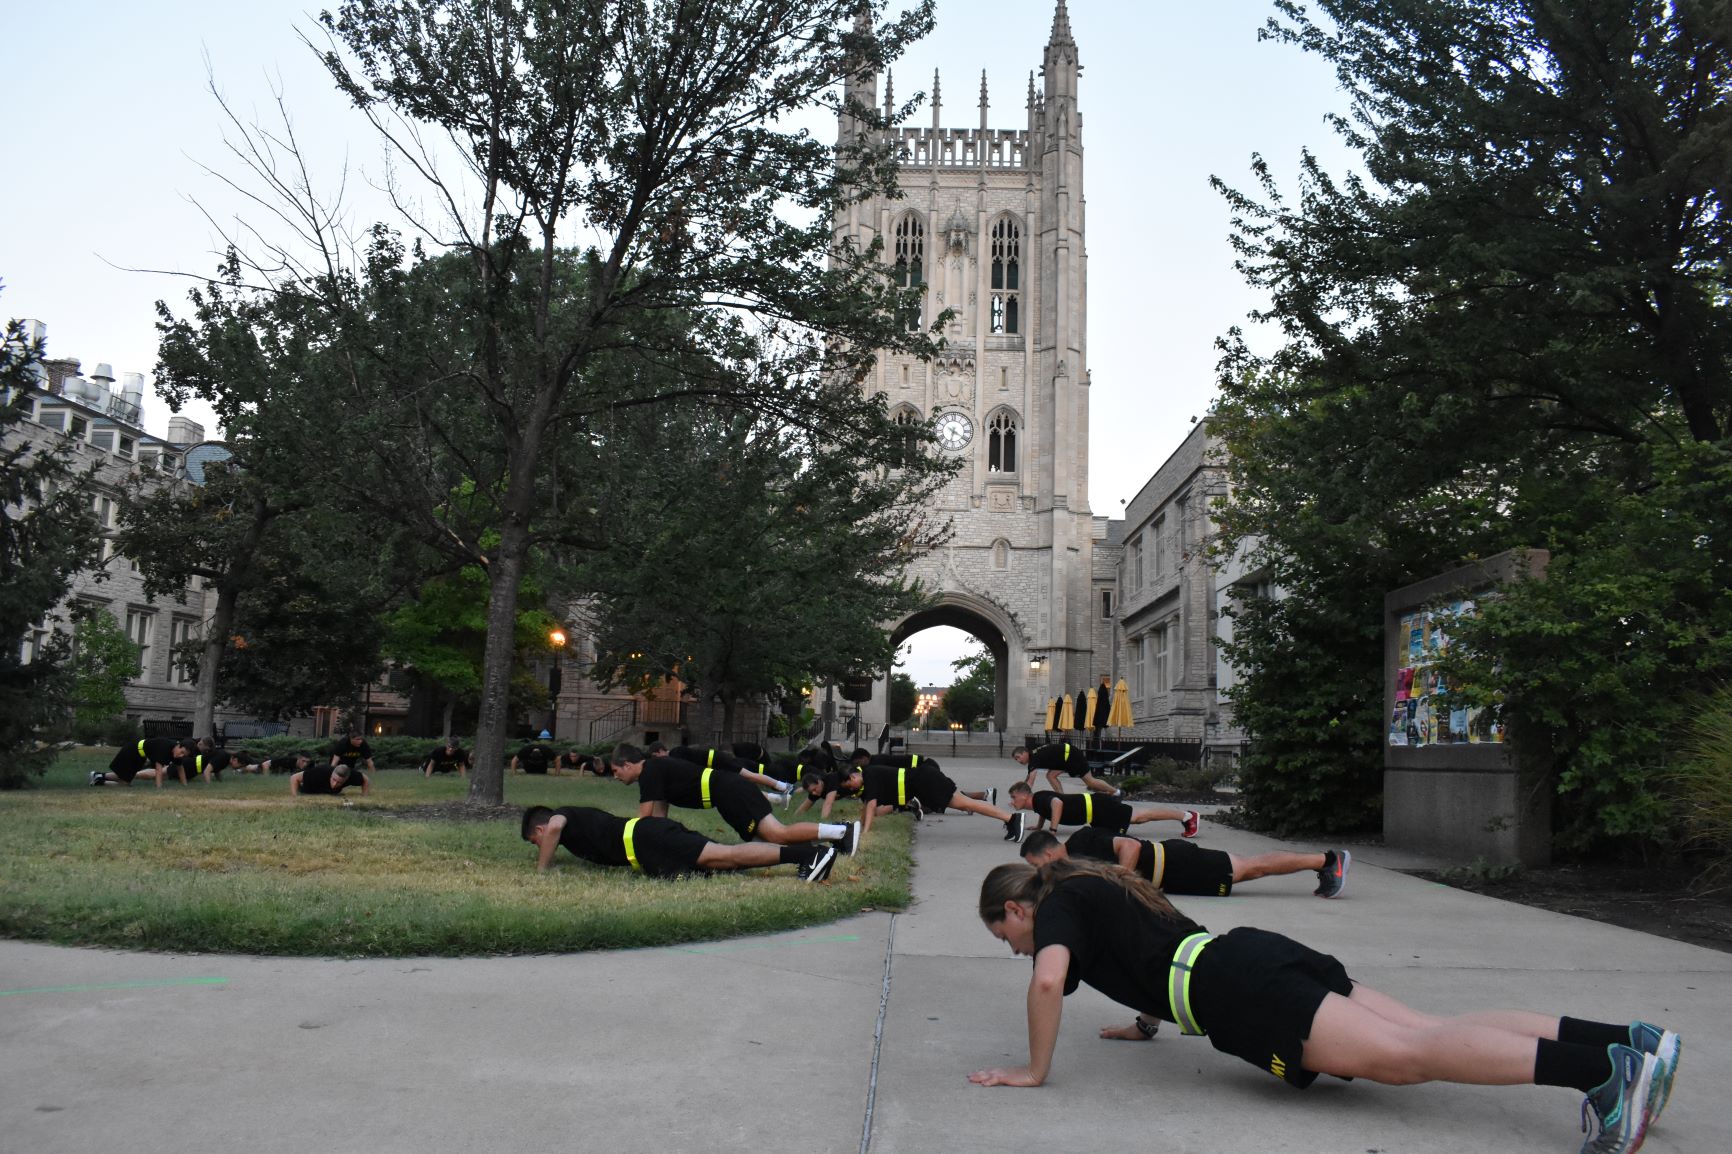 PT by Memorial Union